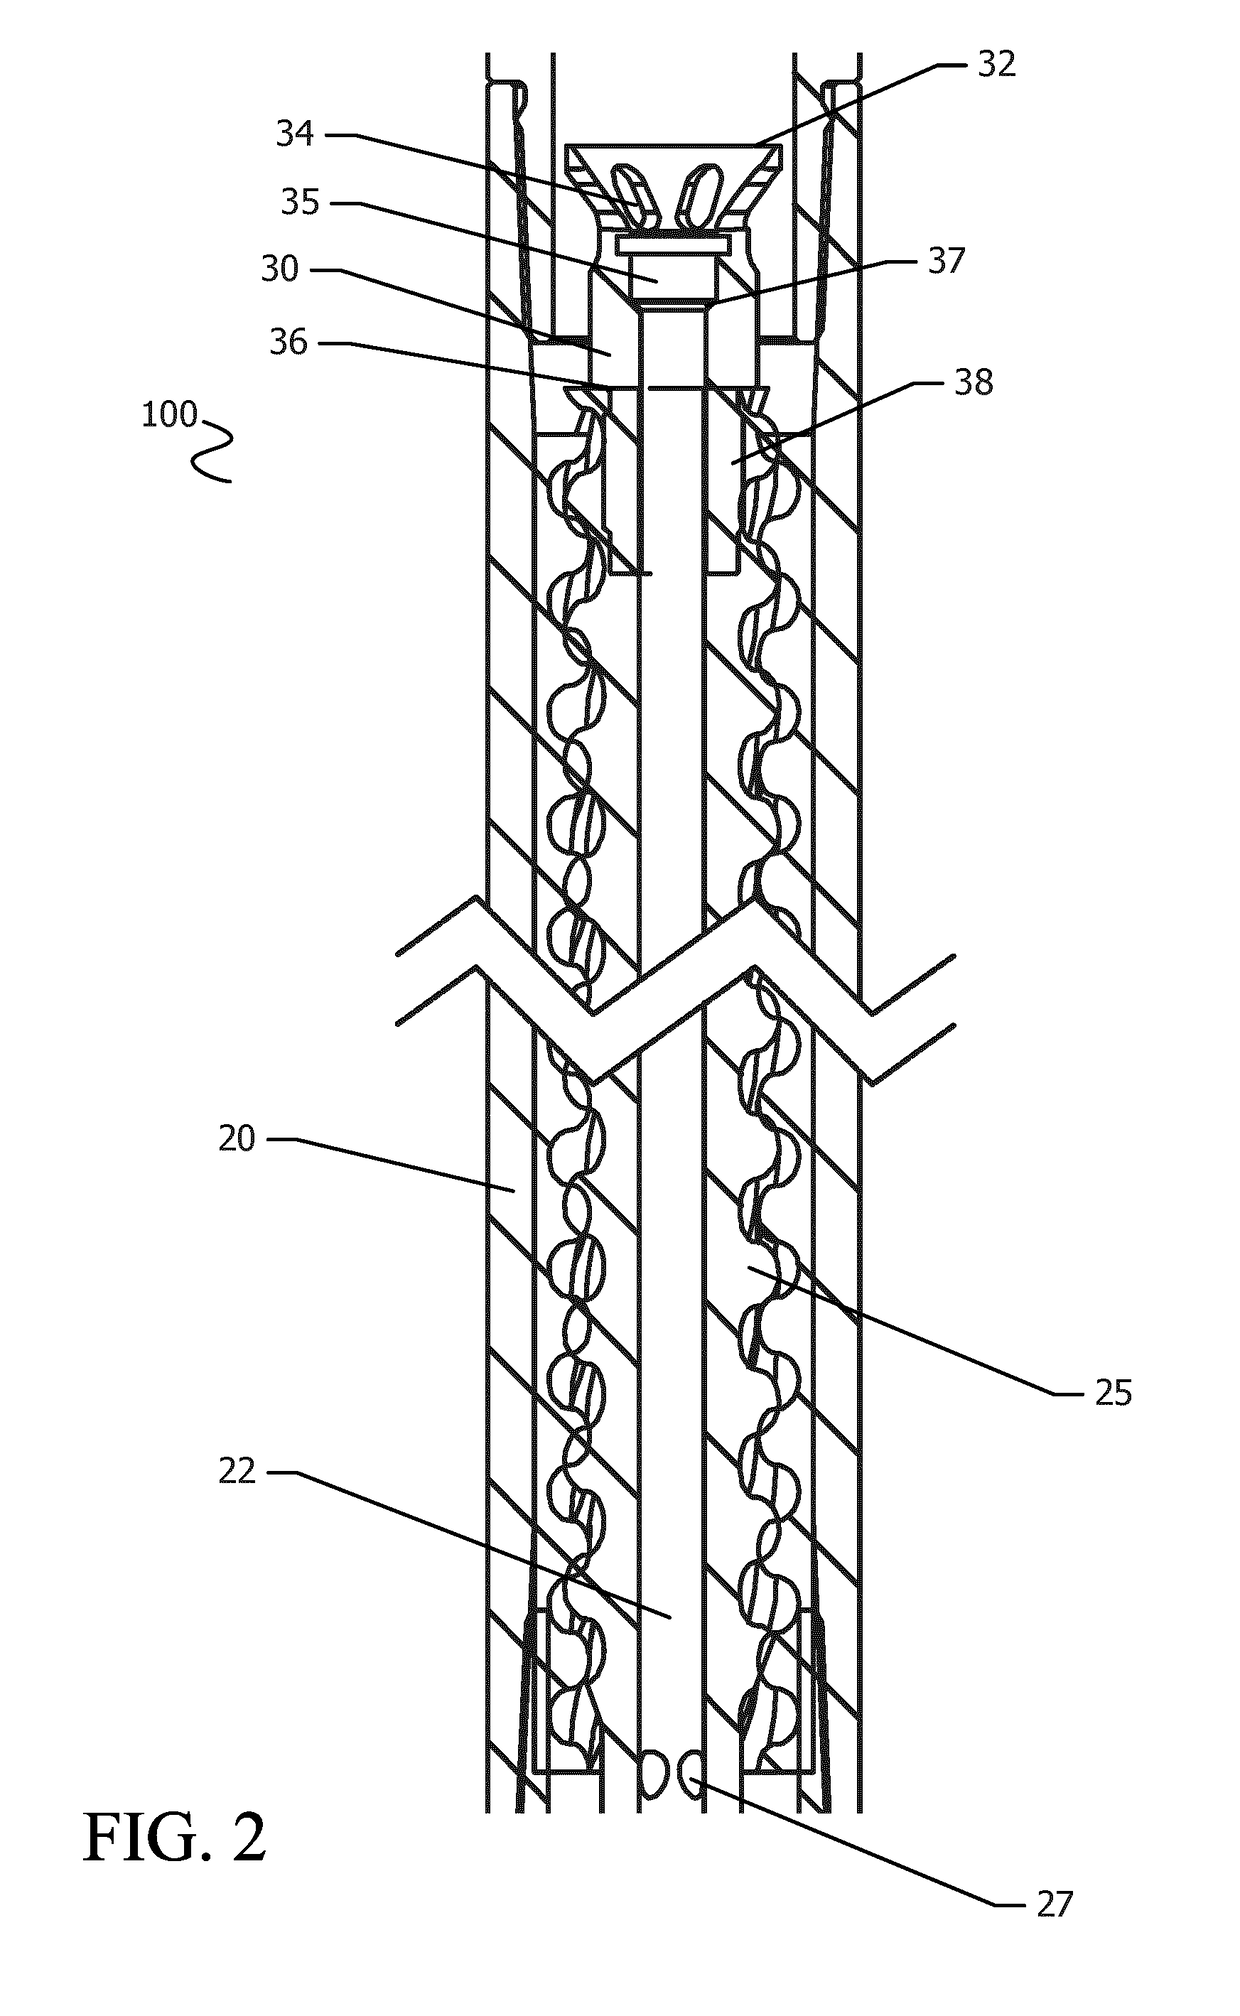 Selective activation of motor in a downhole assembly